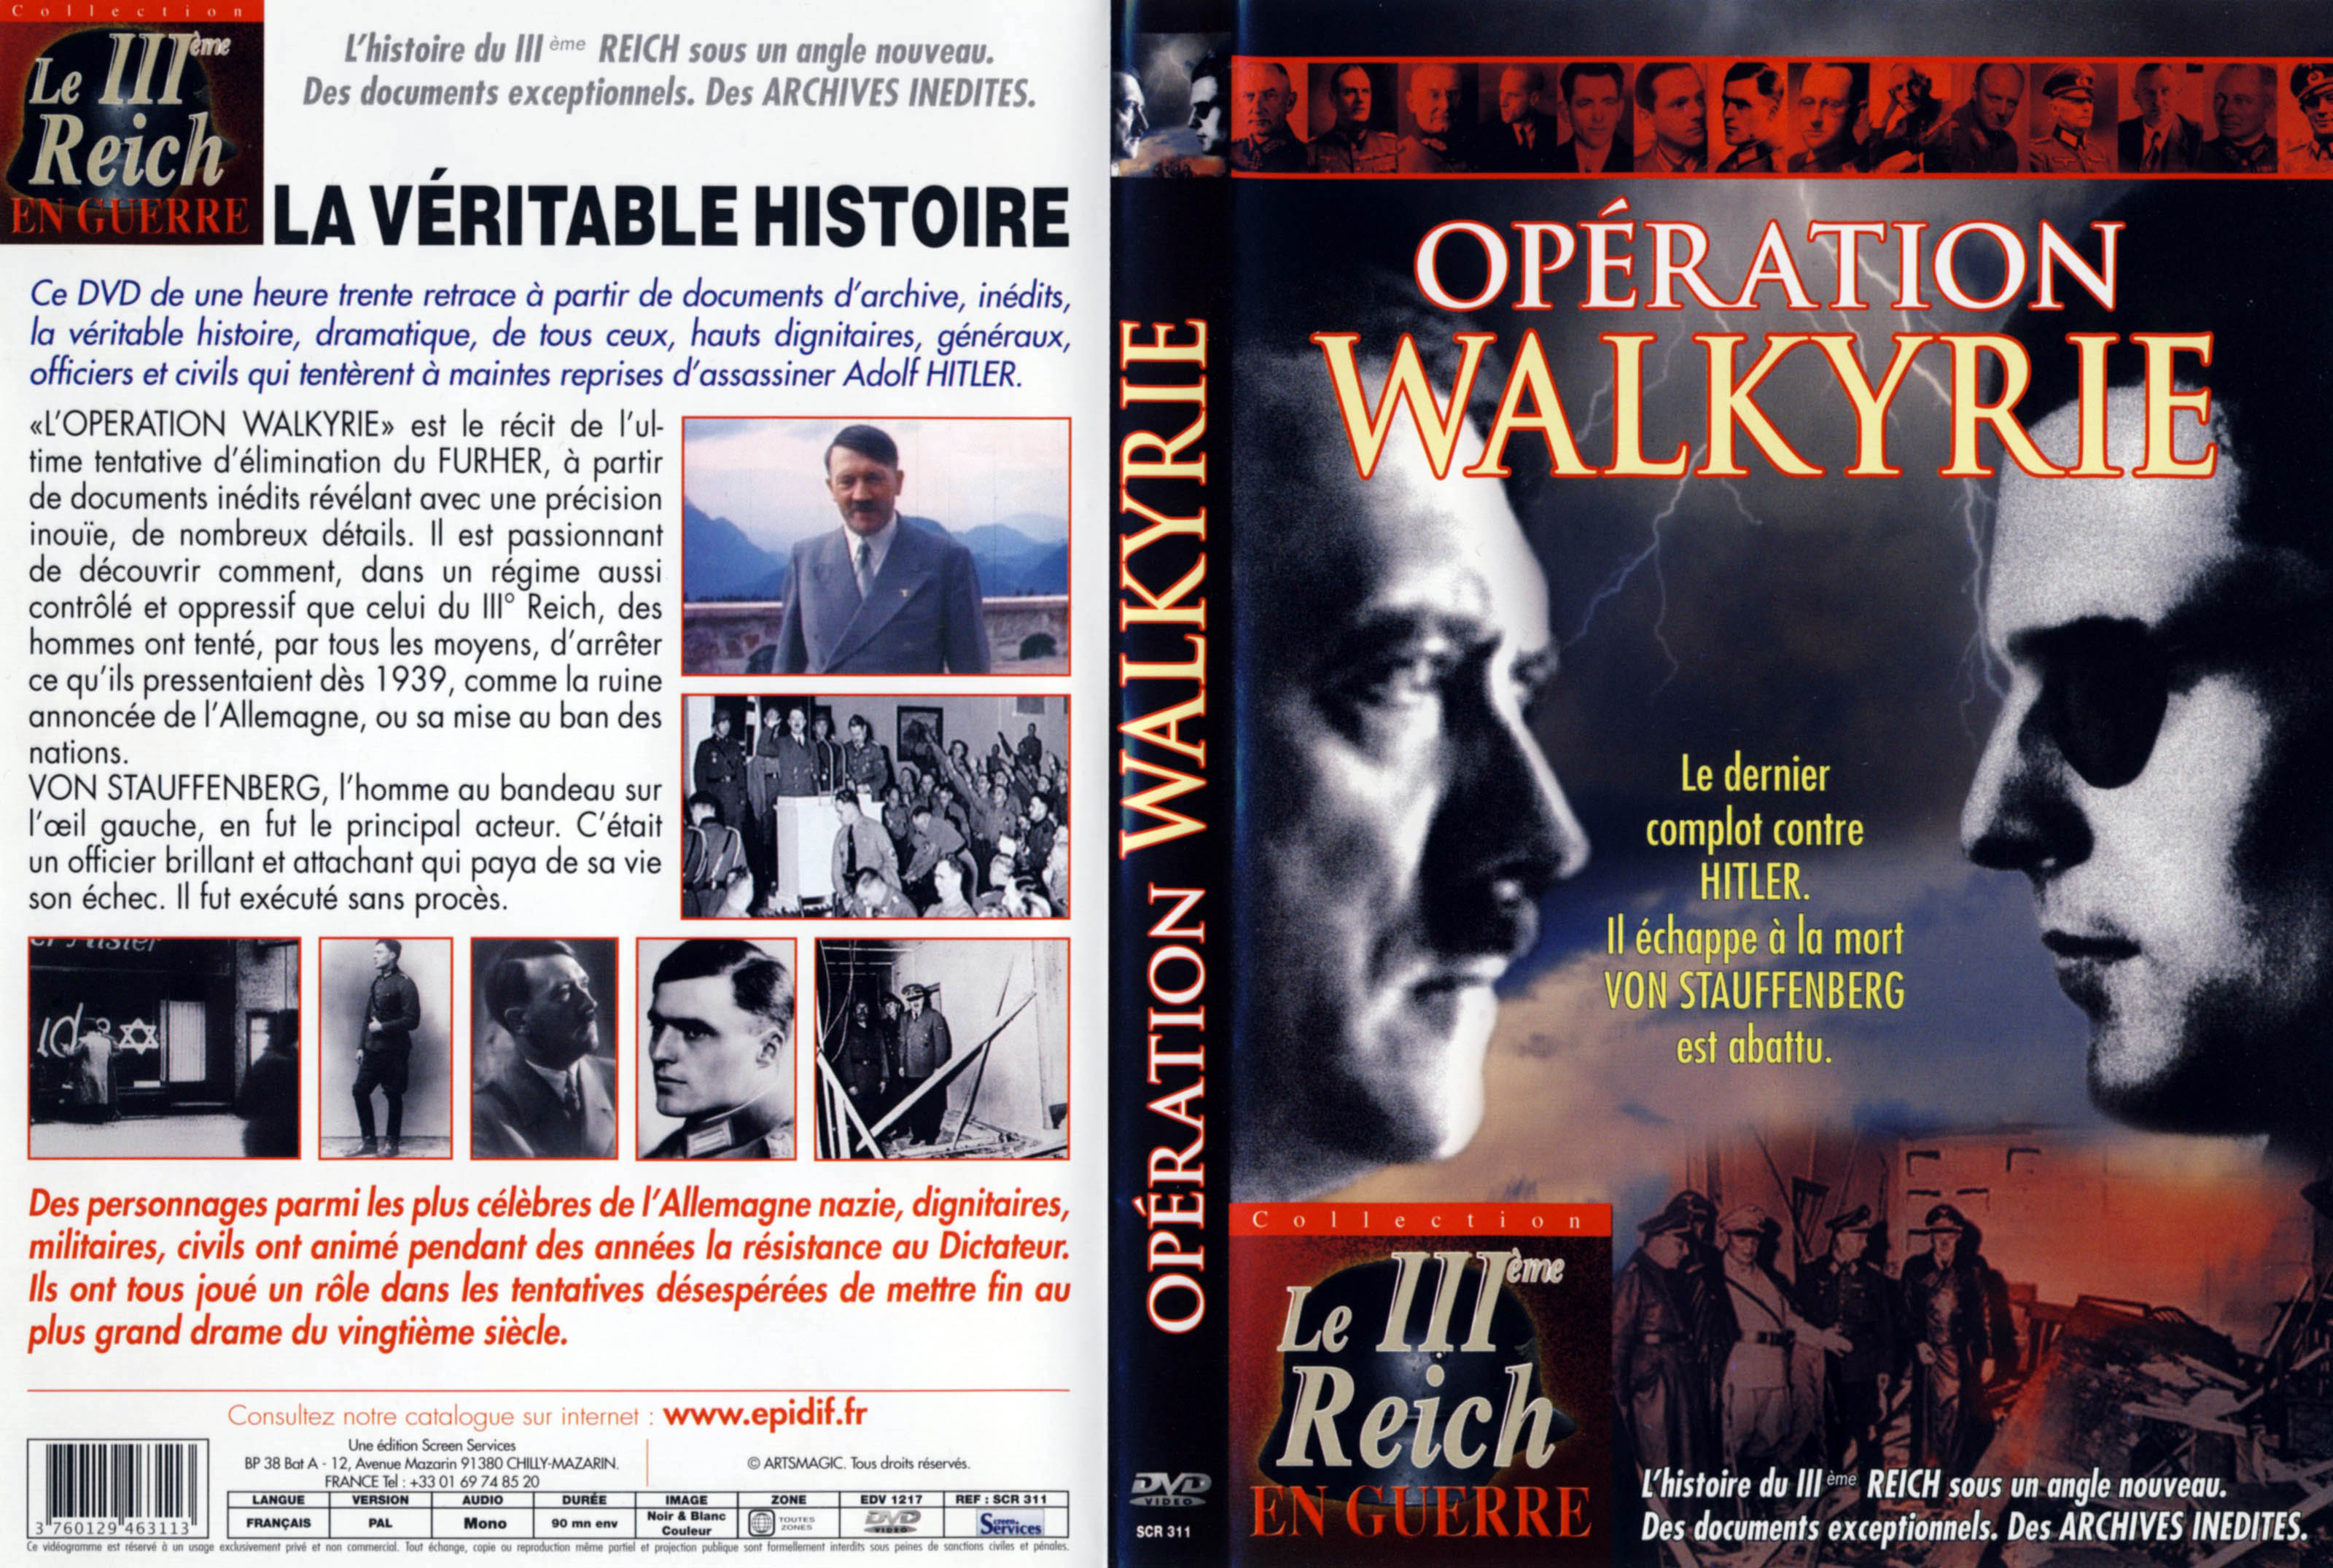 Jaquette DVD Operation Walkyrie (Documentaire)